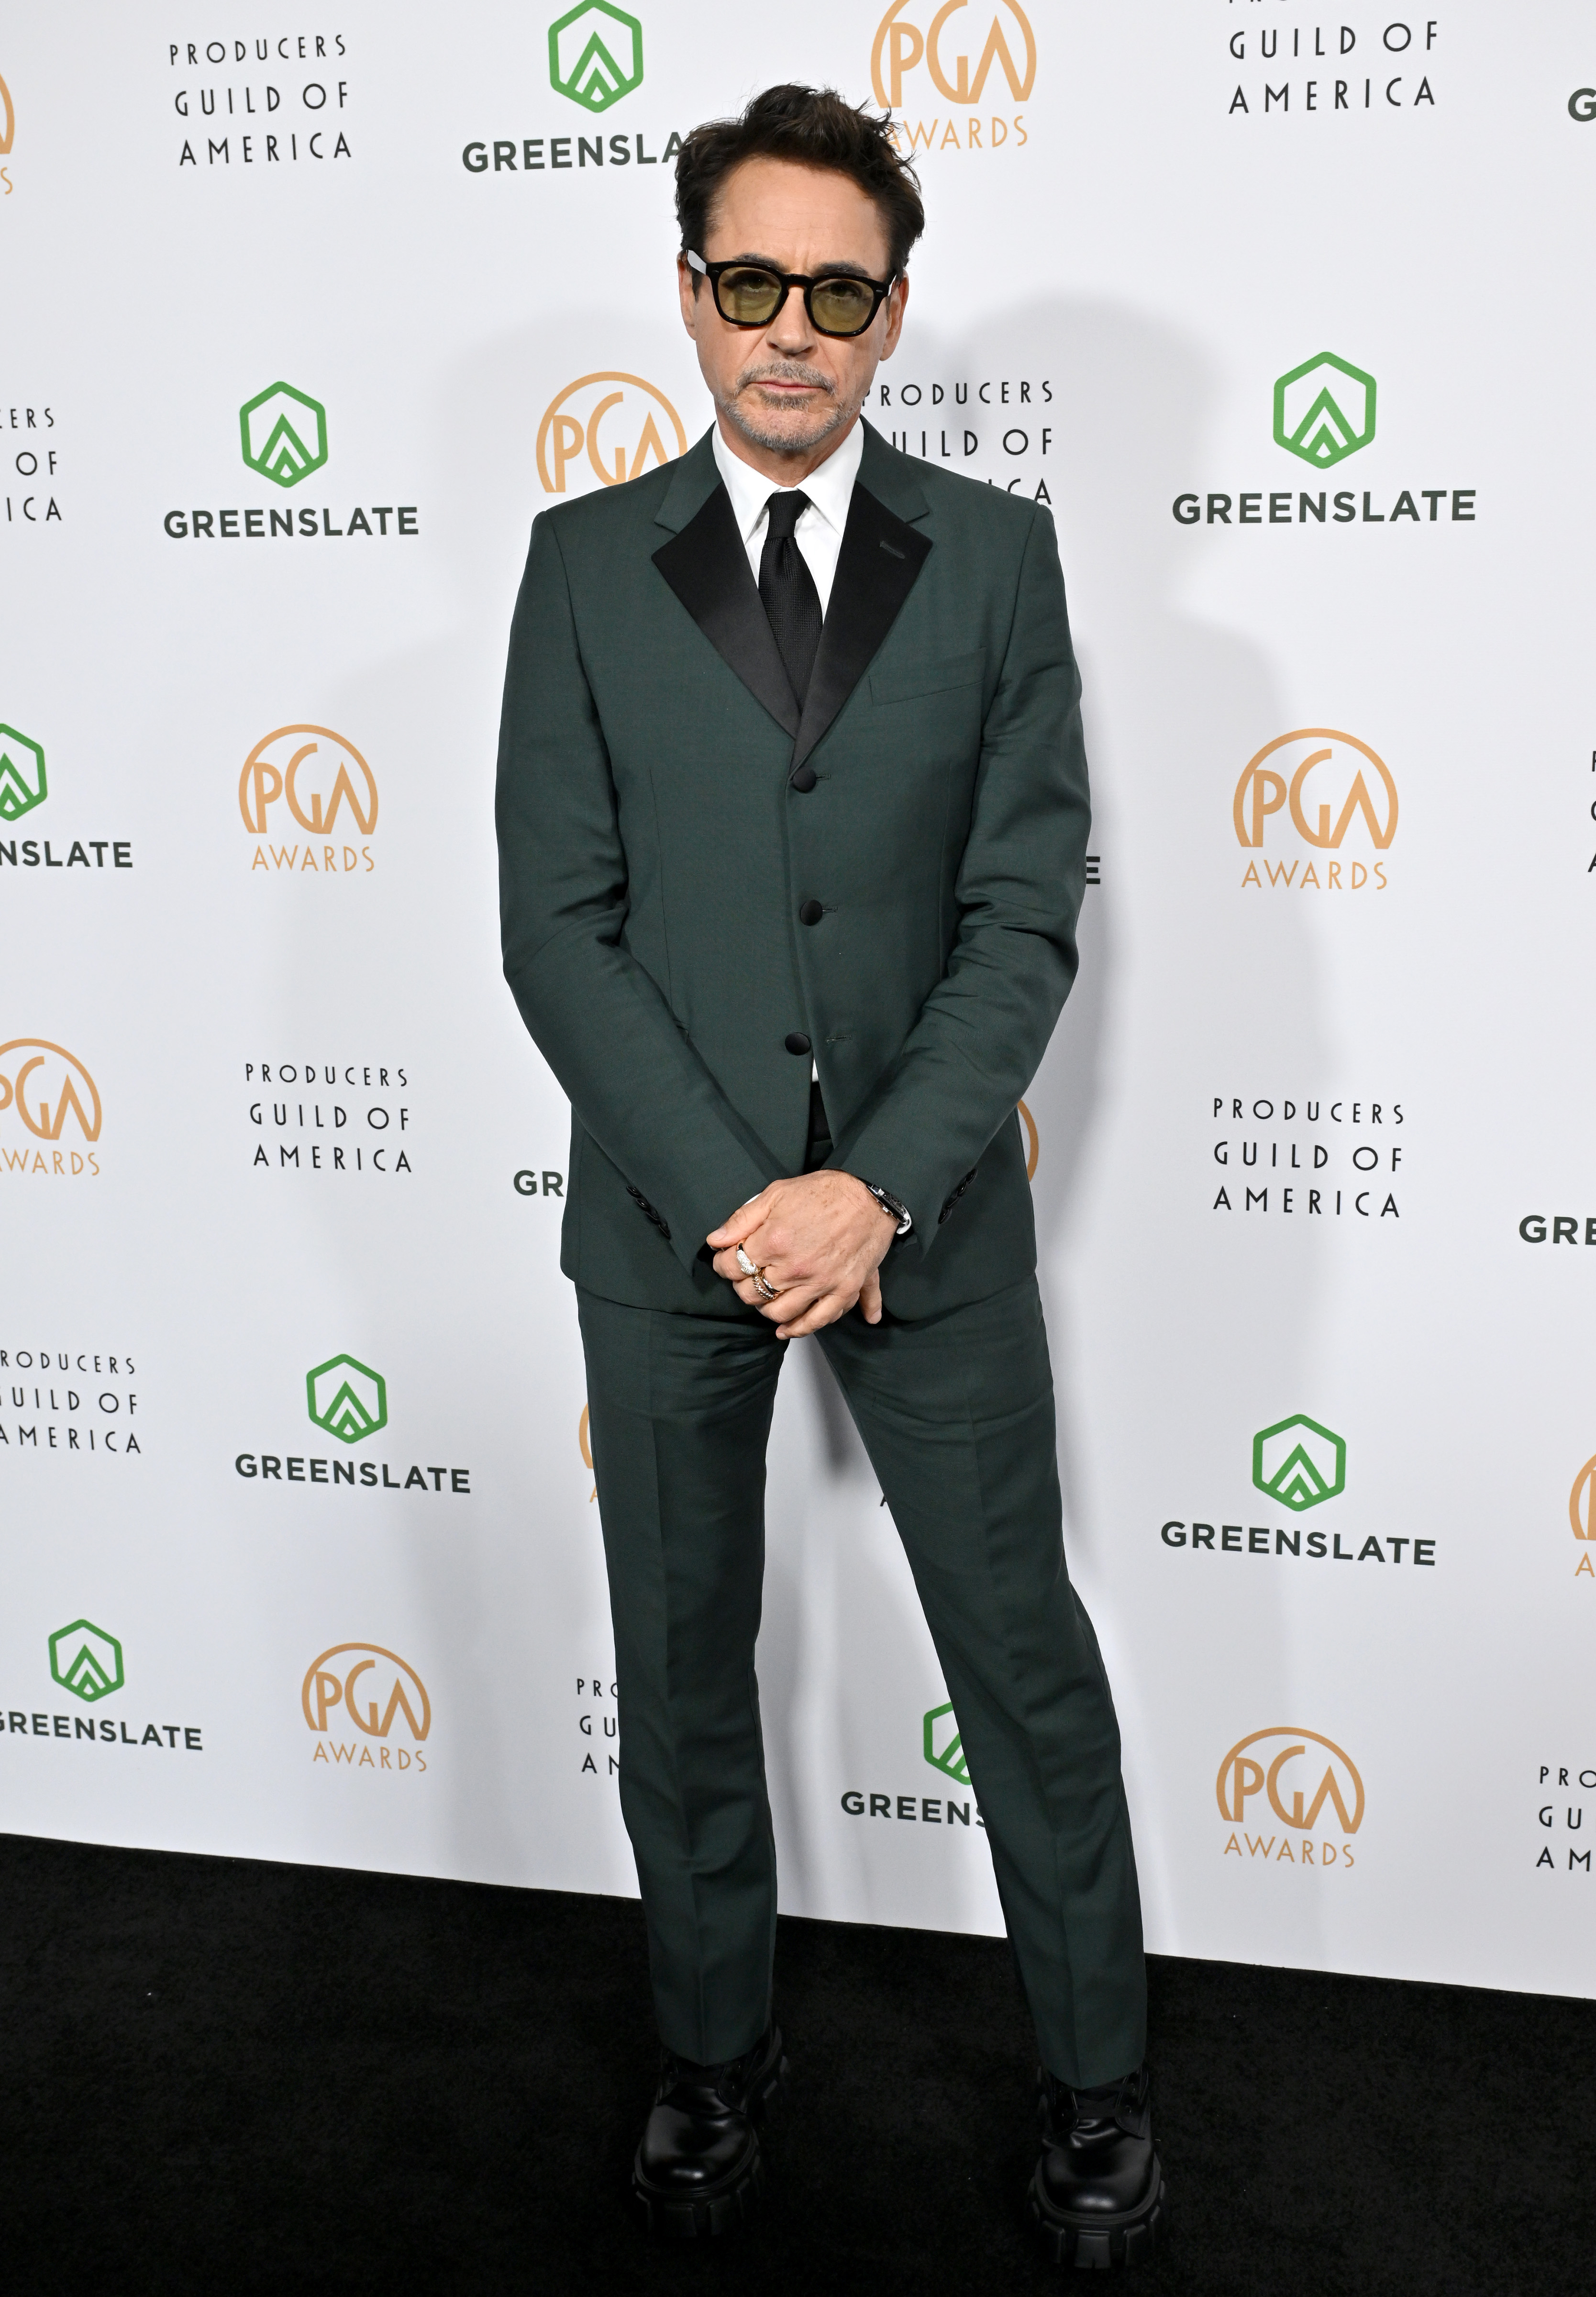 Robert Downey Jr. stands in front of a Producers Guild of America backdrop wearing a sharp suit